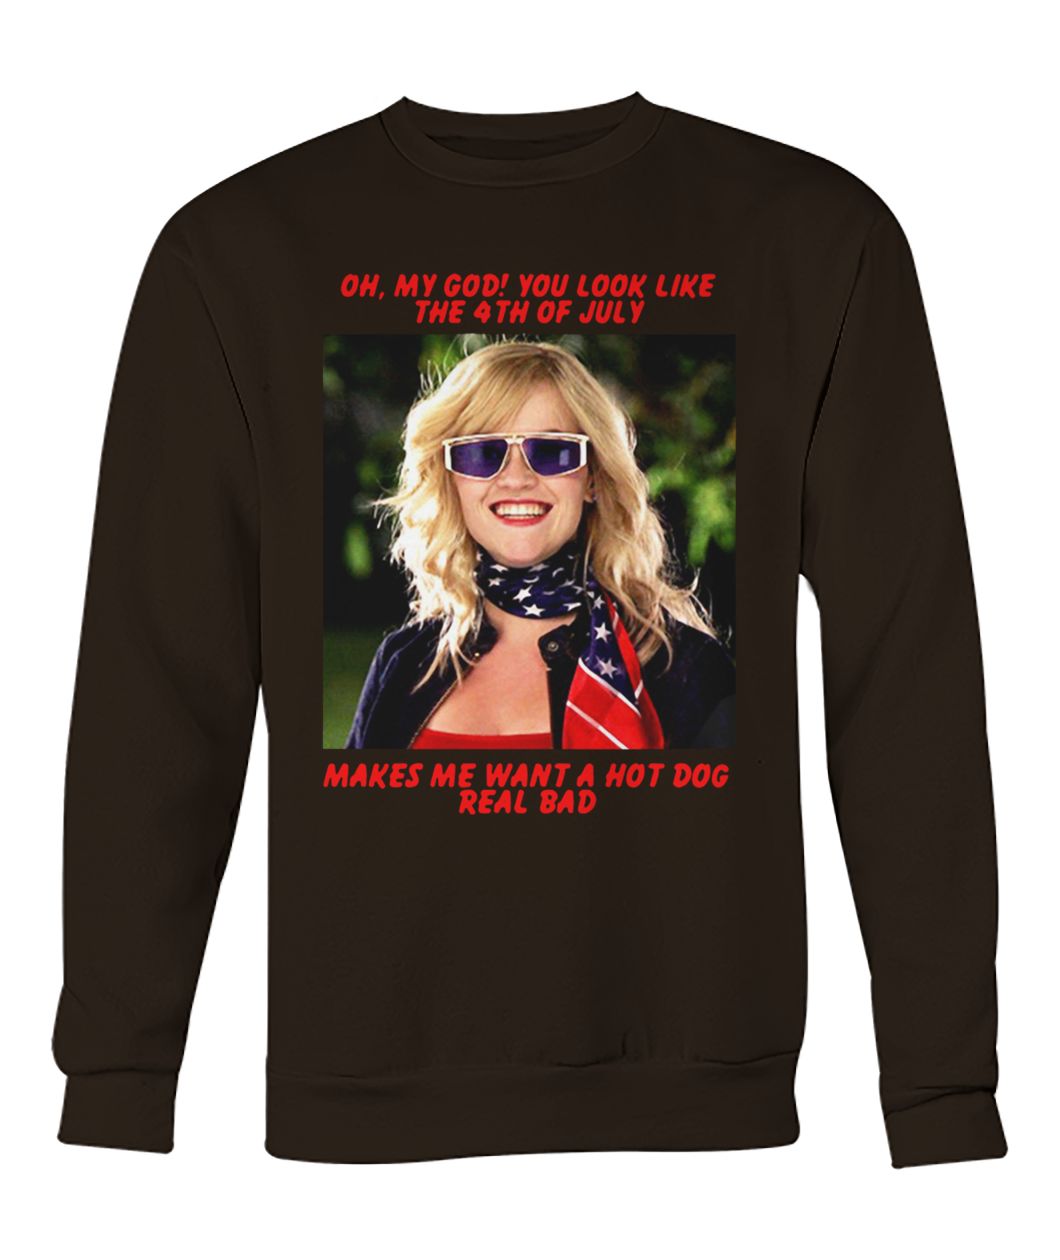 Legally blonde oh my god you look like the 4th of july crew neck sweatshirt